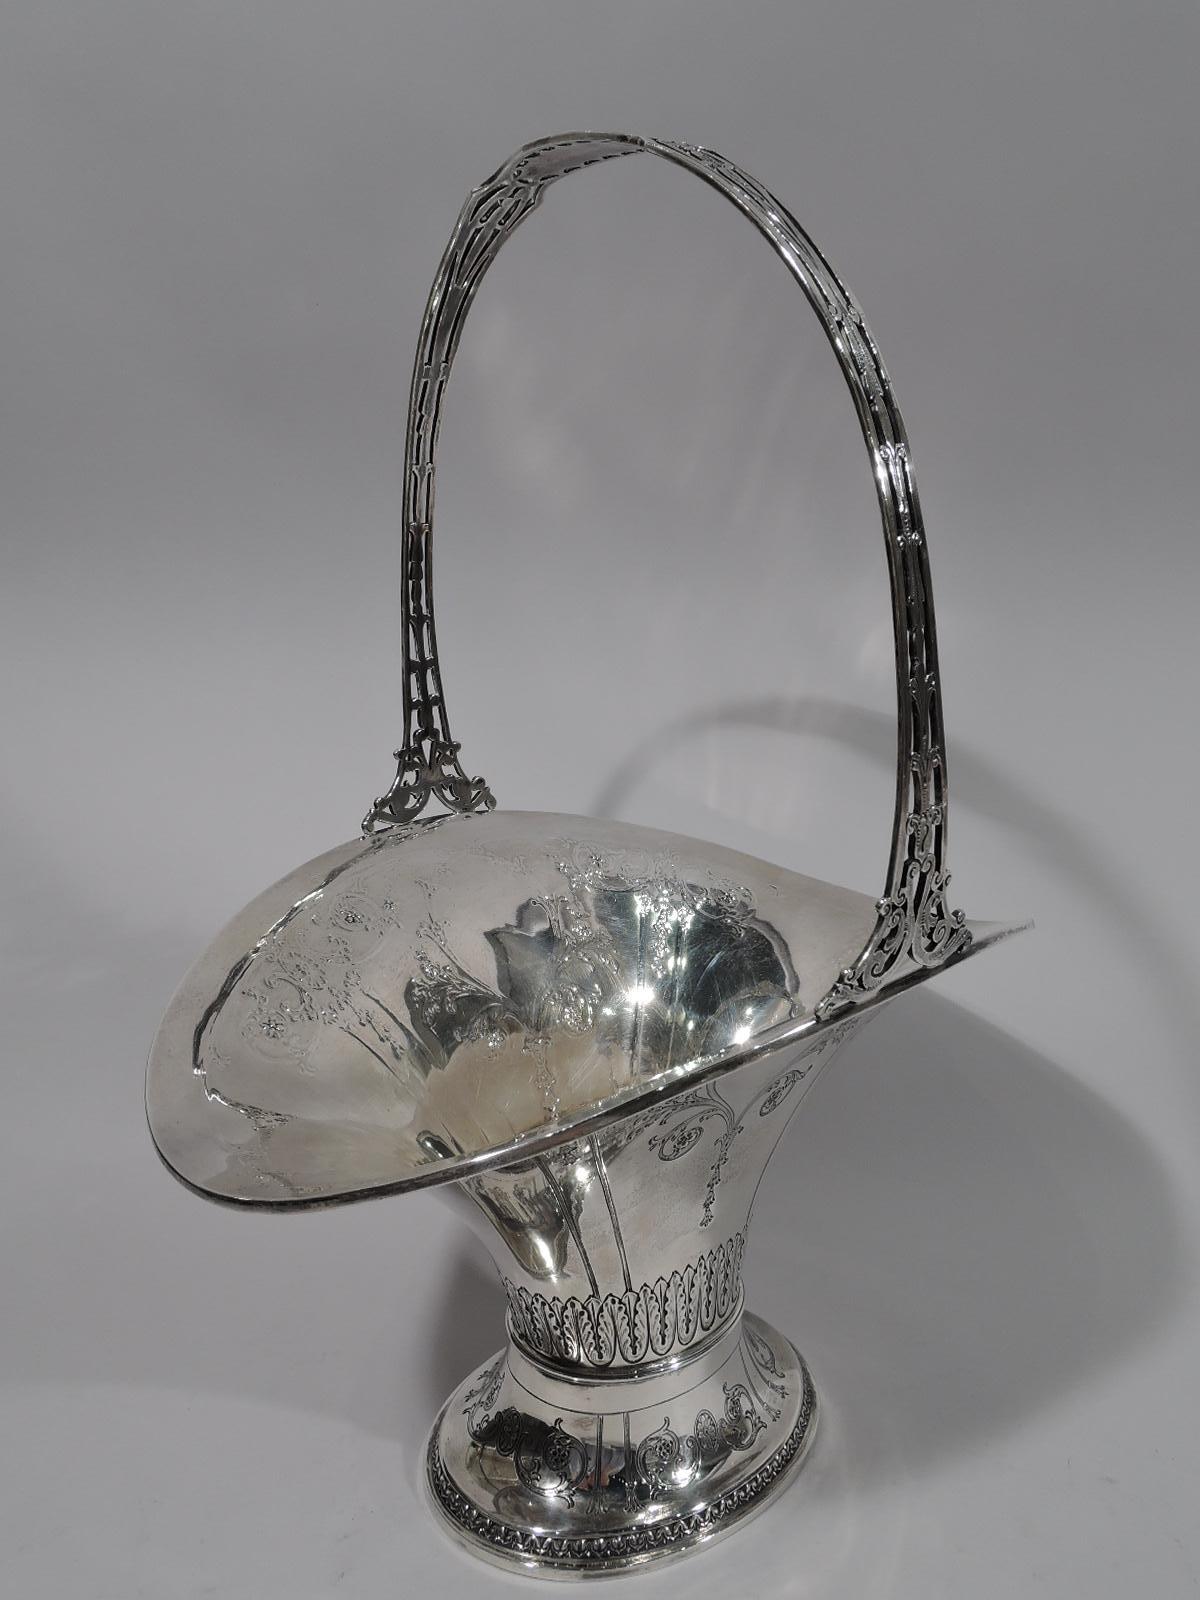 Pretty Art Nouveau sterling silver bridal basket. Made by Gorham in Providence in 1917. Oval body with wide and flared mouth, and spread foot. Engraved, chased, and applied ornament, including scrolls, paterae, flowers, and leaf-and-dart. Fixed open